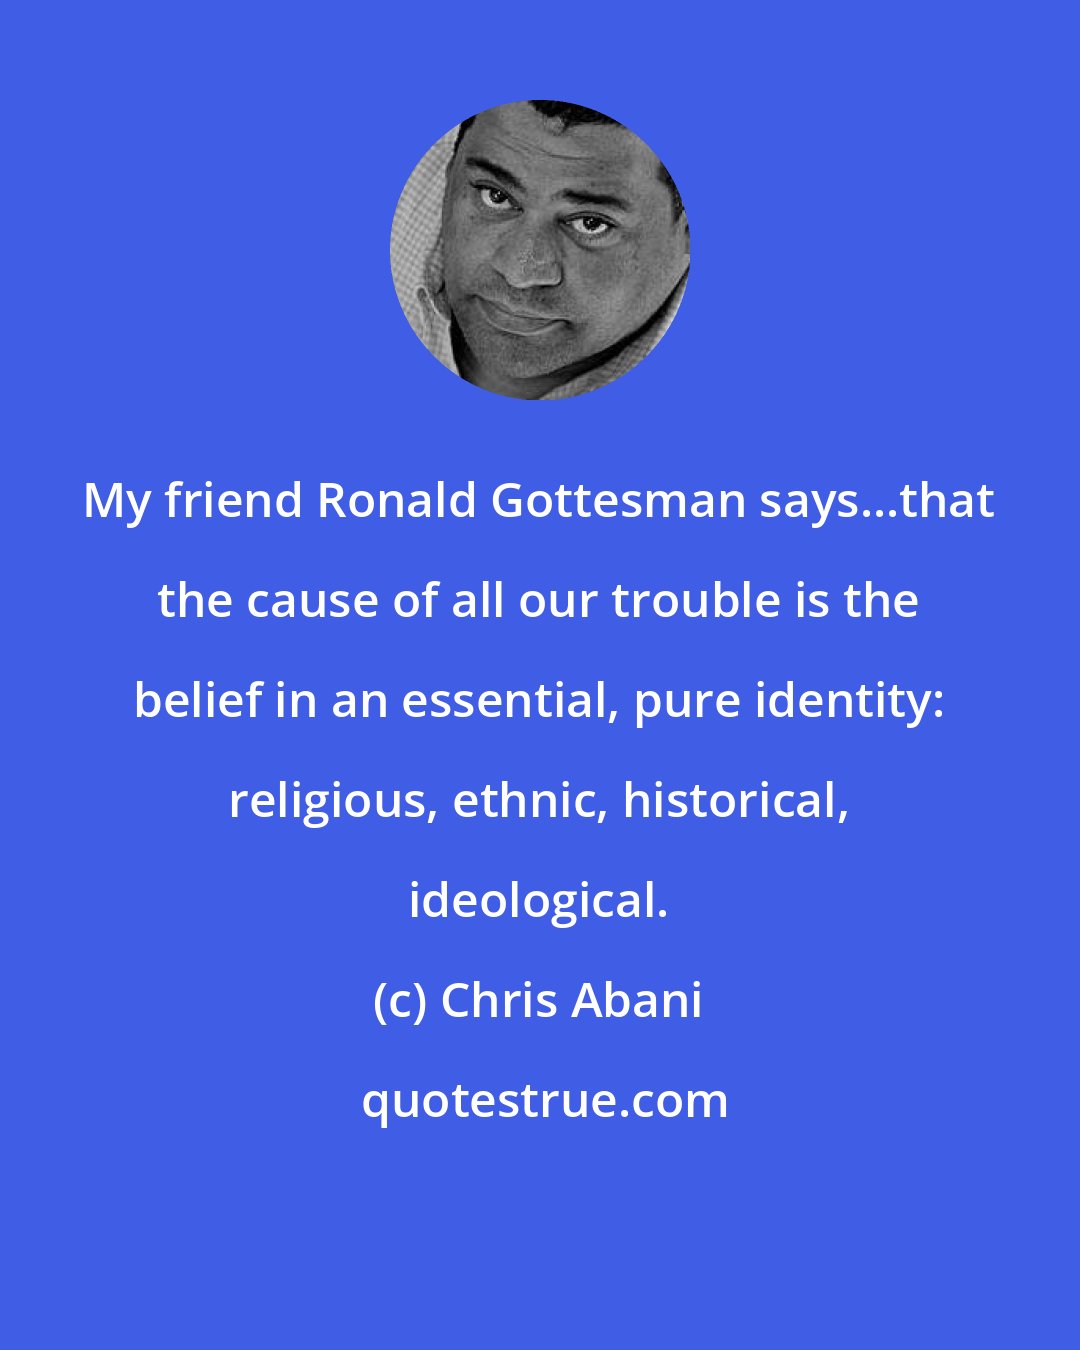 Chris Abani: My friend Ronald Gottesman says...that the cause of all our trouble is the belief in an essential, pure identity: religious, ethnic, historical, ideological.